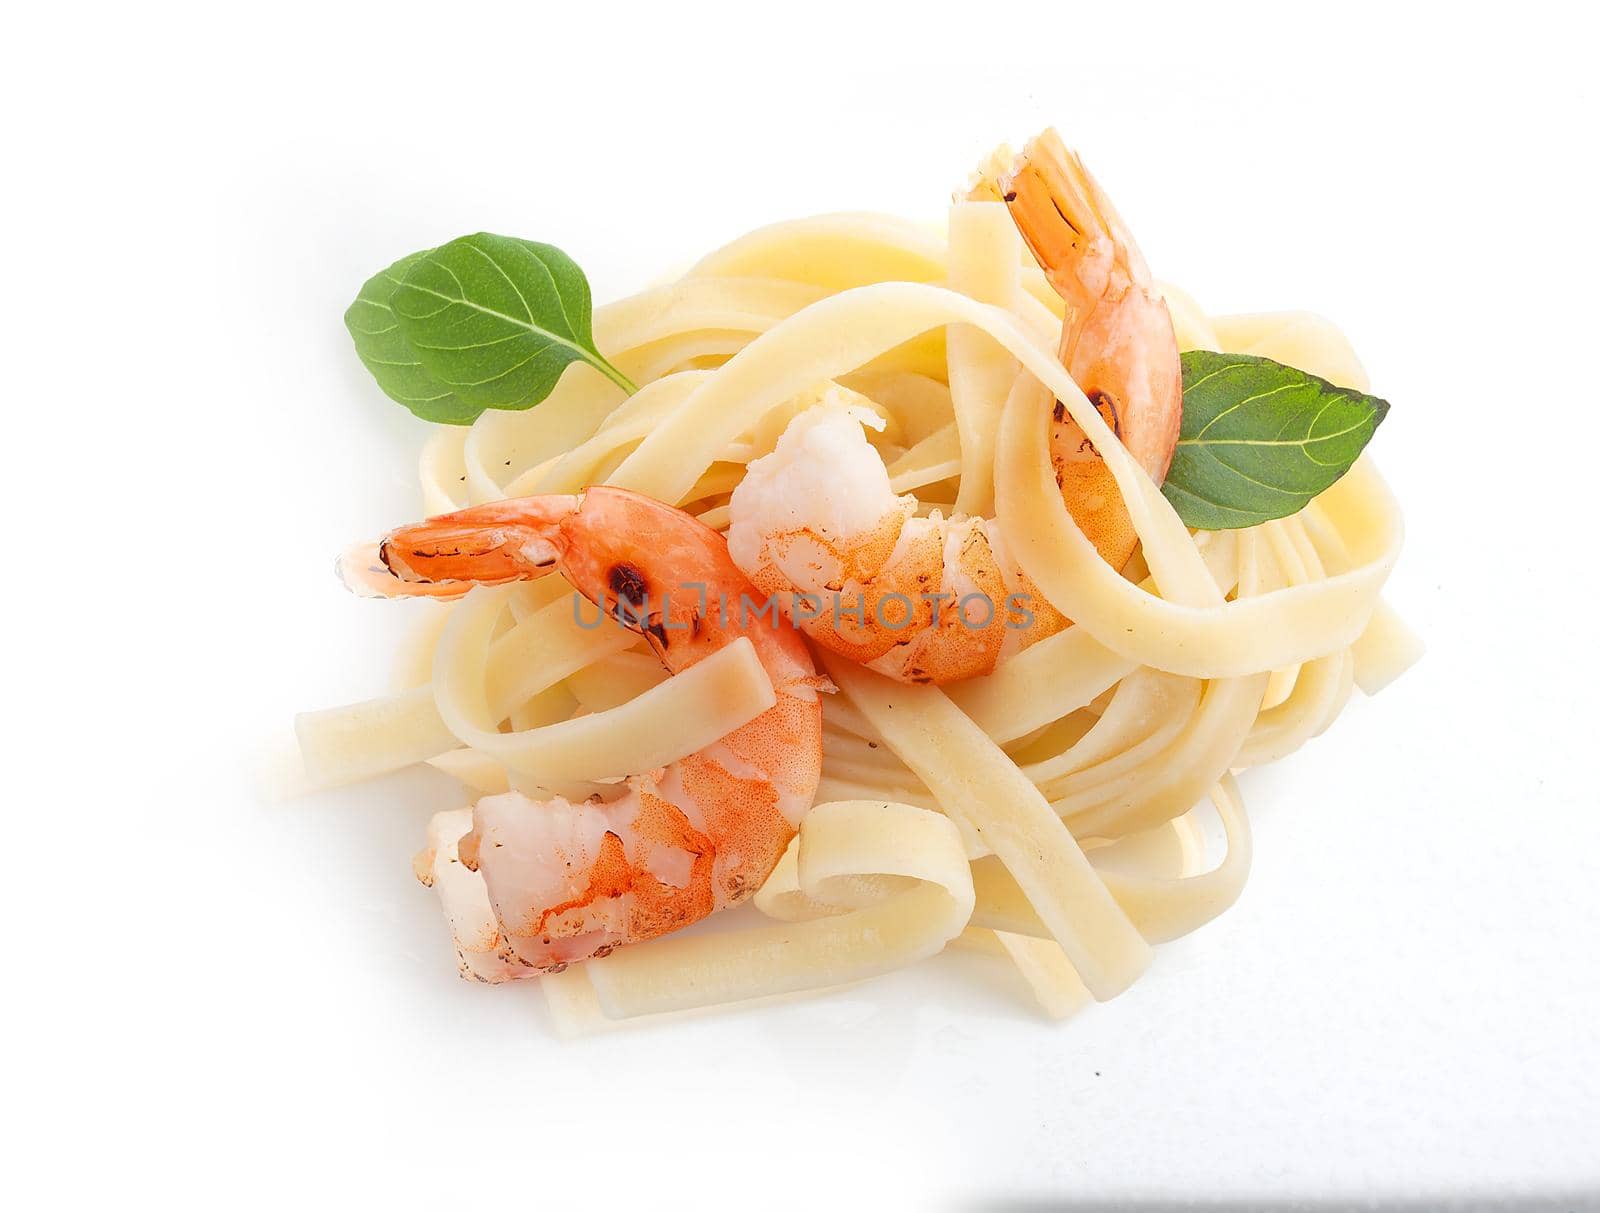 Roasted shrimps  with pasta by Angorius